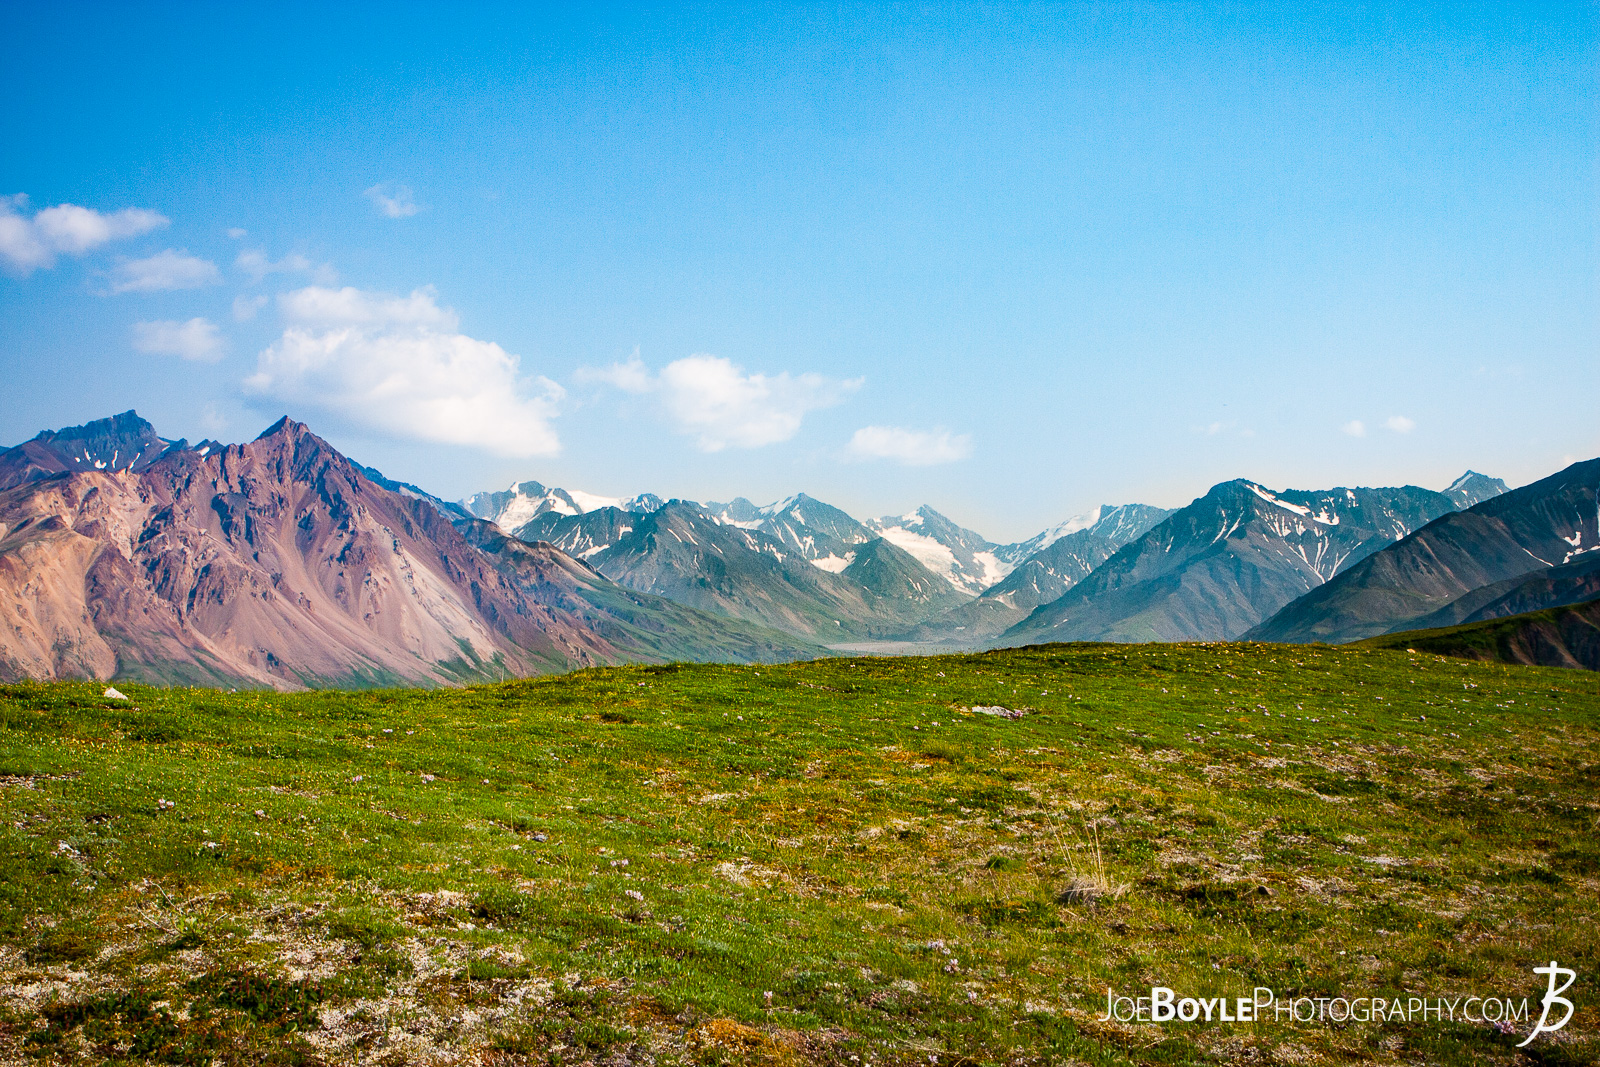  My buddy and myself spent some time in different grids within Denali National Park, Alaska. This is a photo of some lovely mountains and a green field from within grid 6. We certainly didn't cover as much terrain as we thought we would. Hiking in the backcountry of Denali was tough for us "first timers" in Alaska! 